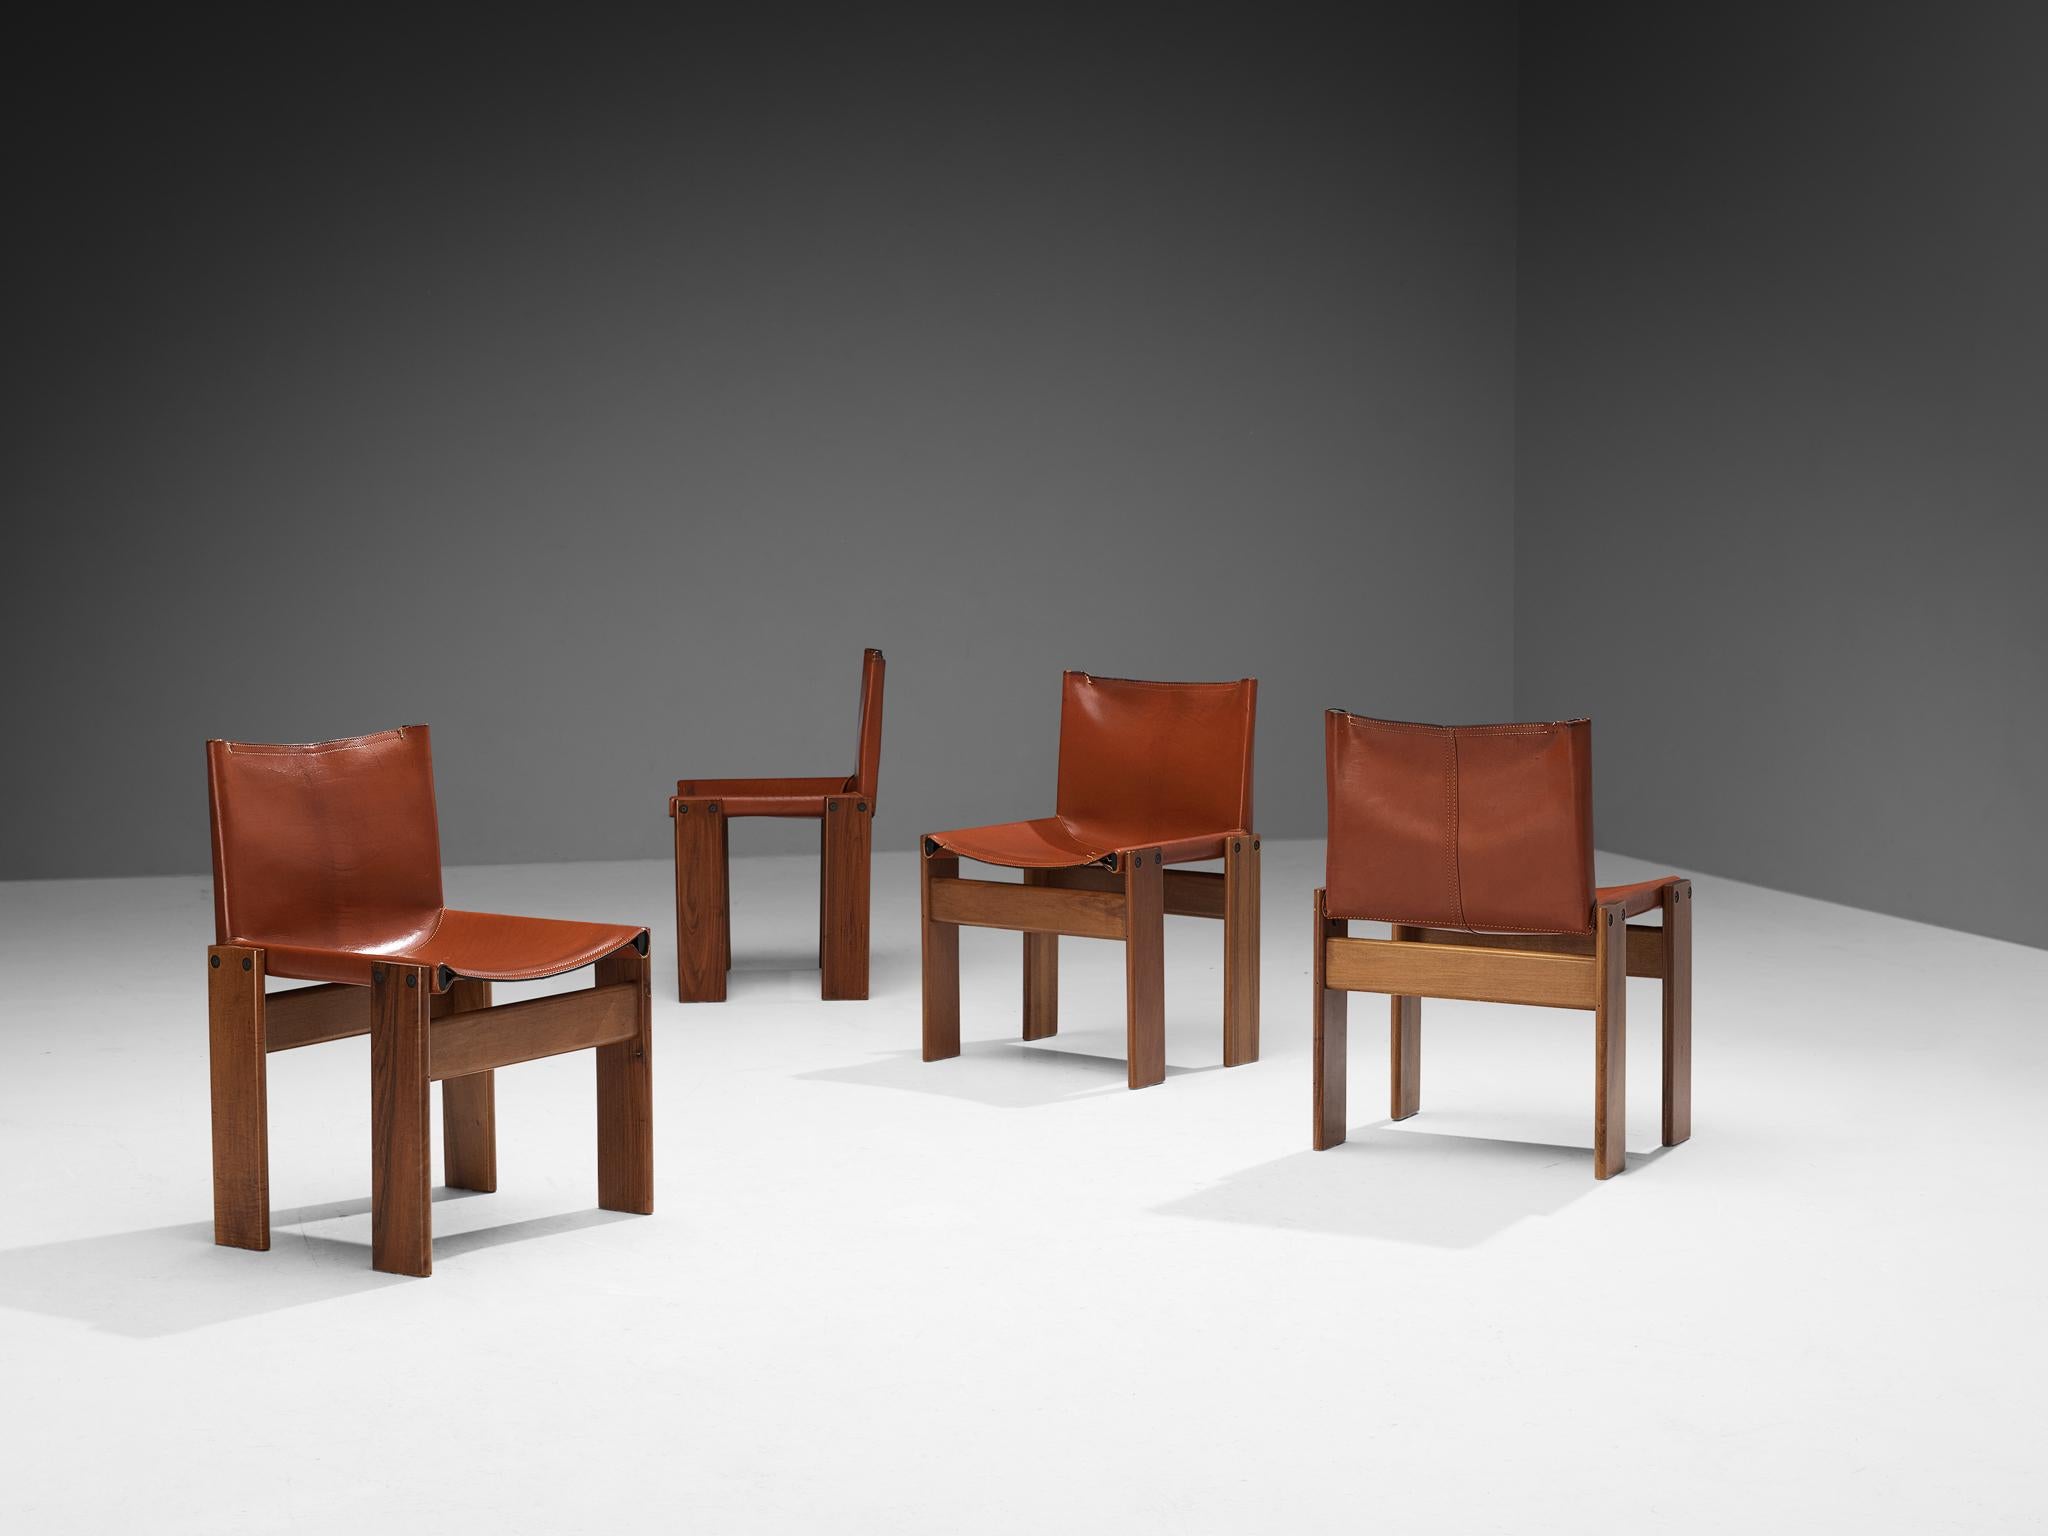 Afra & Tobia Scarpa for Molteni, set of four 'Monk' dining chairs, walnut, leather, Italy, 1974.

The deep red leather shows beautiful patina and forms a striking combination with the walnut wood. Interesting is the 'flat' shape of this chair where